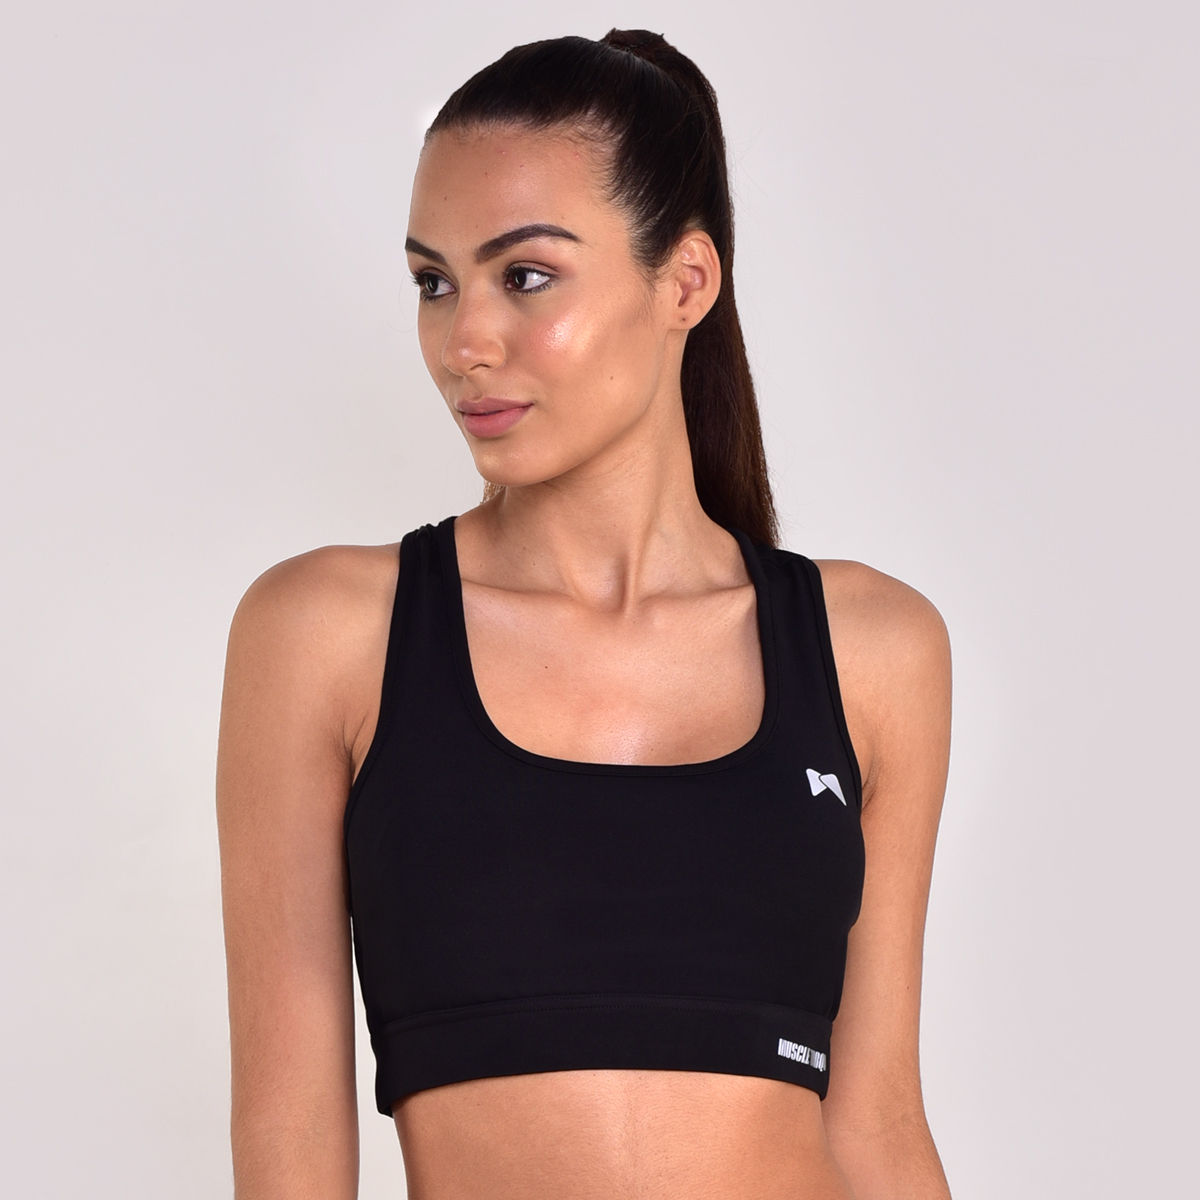 Muscle Torque Non-wired Activewear Removable Padding Sports Bra - Navy Blue